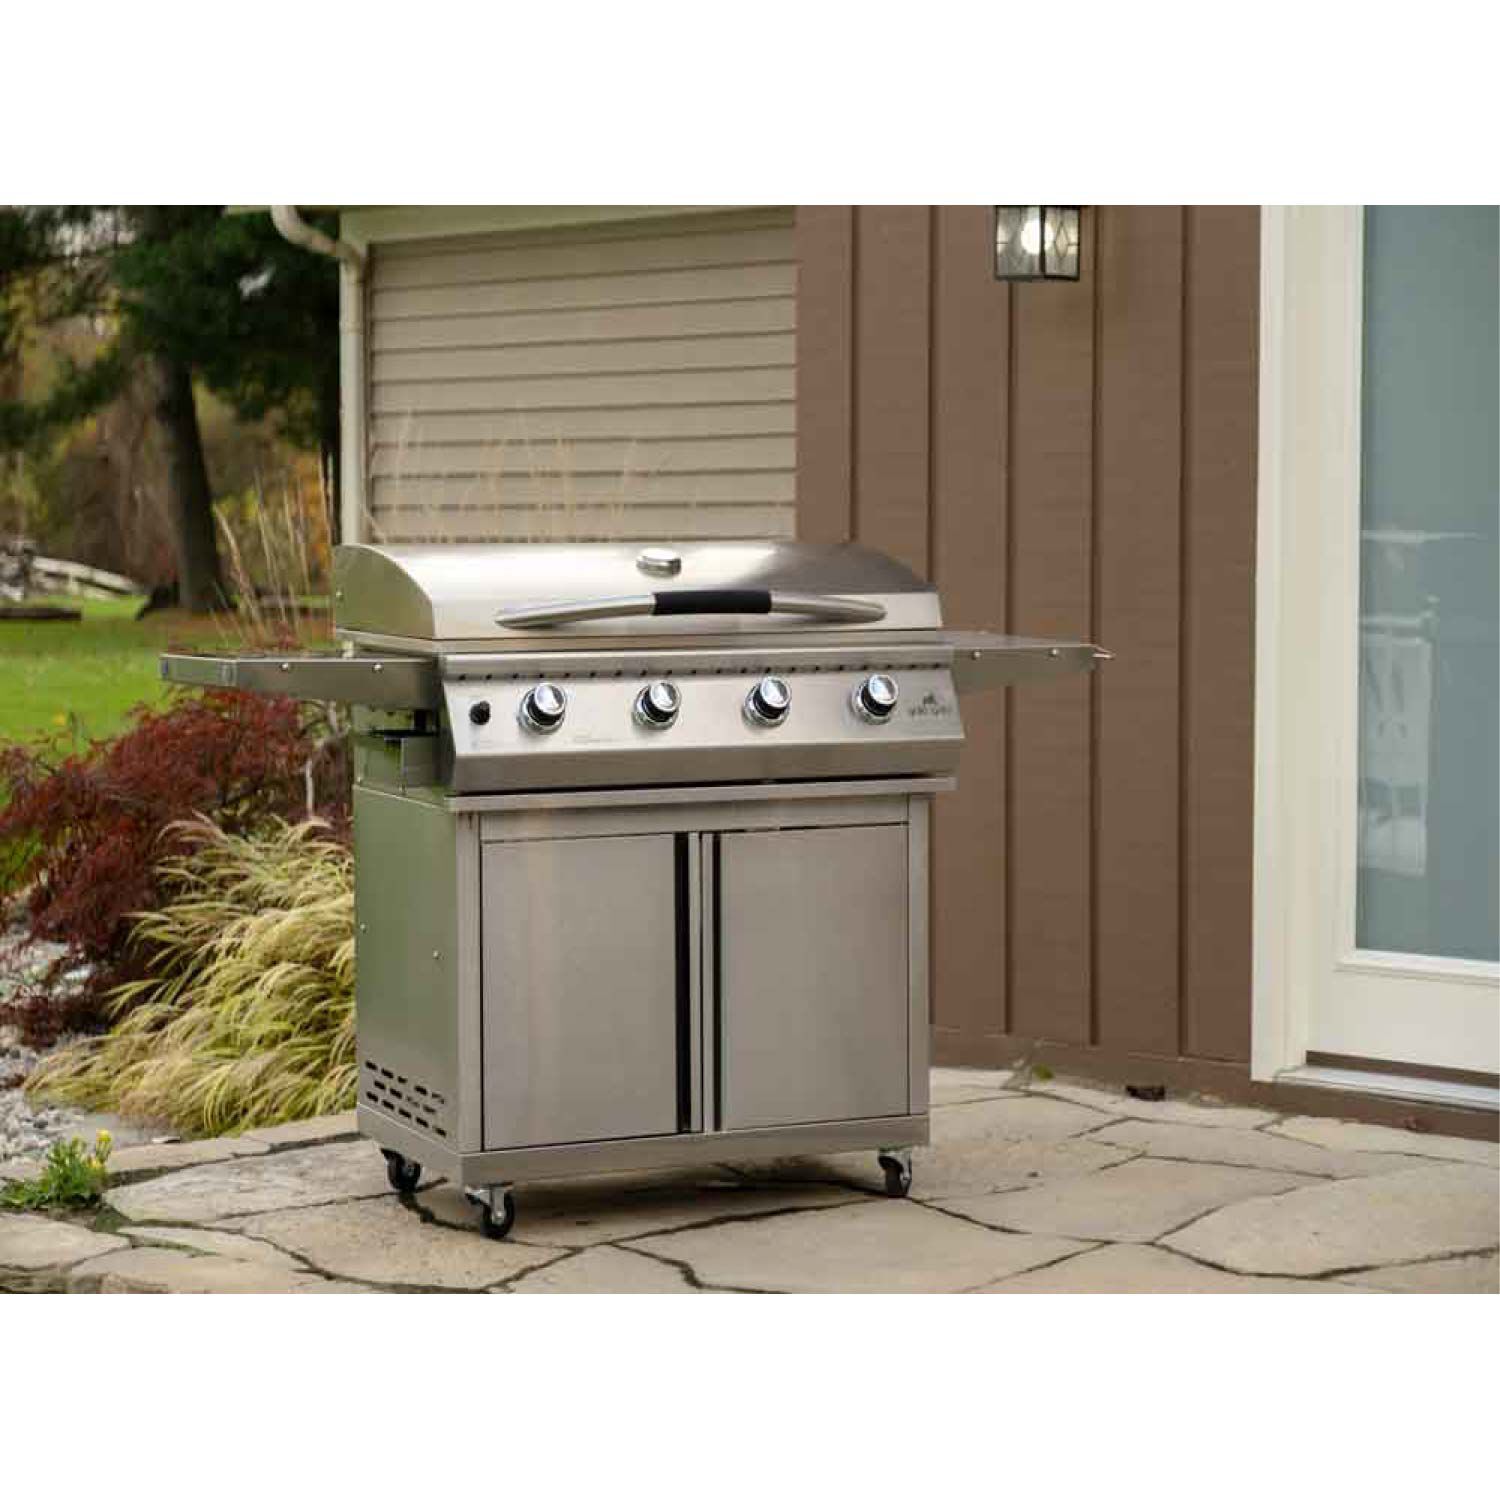 Primate Gas Grill and Griddle